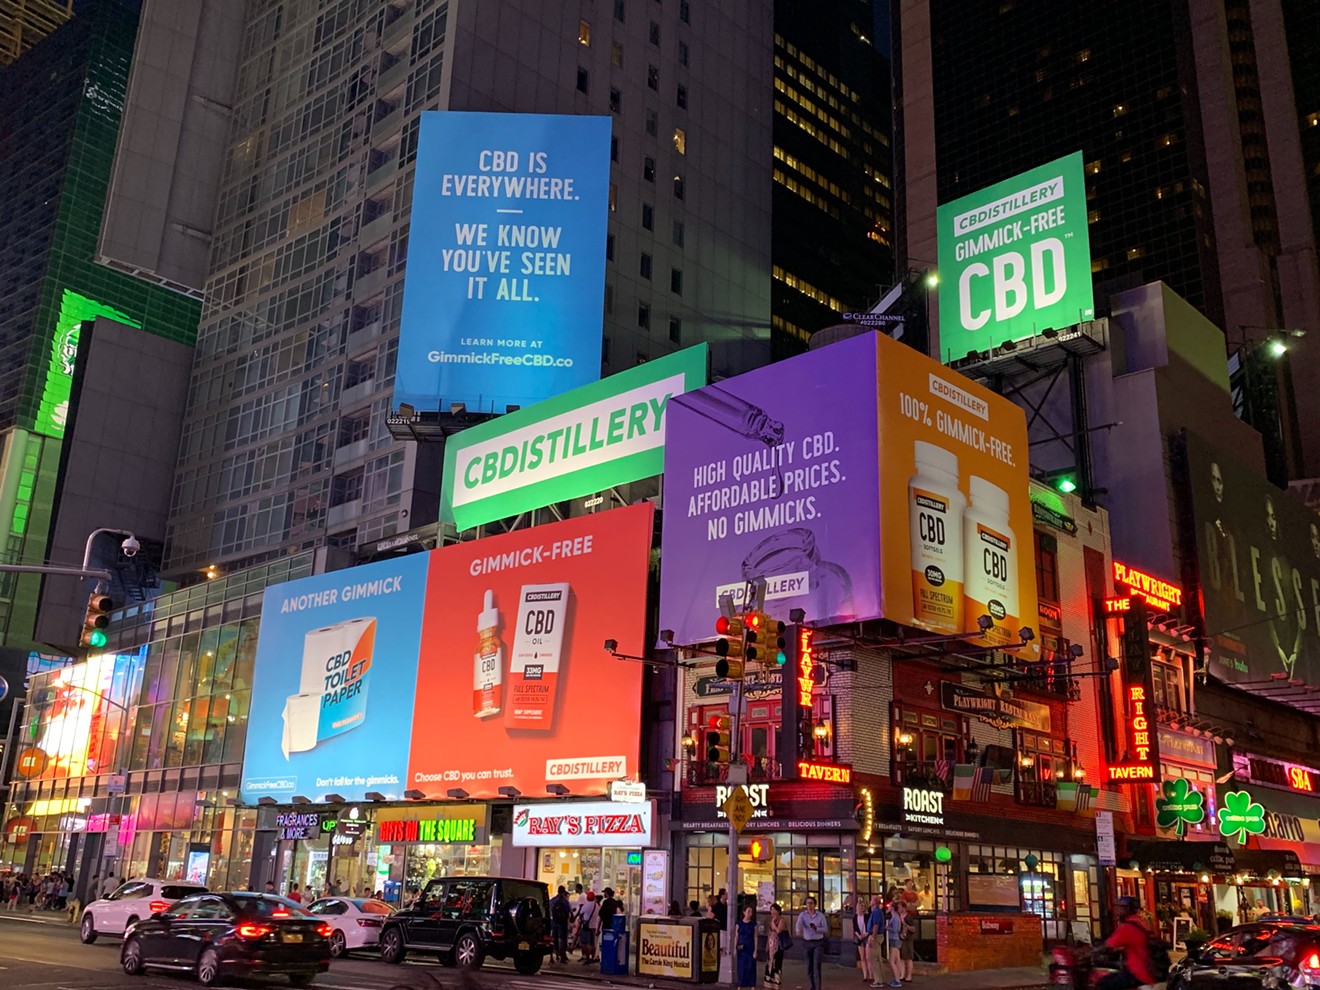 CBDistillery bought advertising in New York's Time Square to announce itself in 2019.